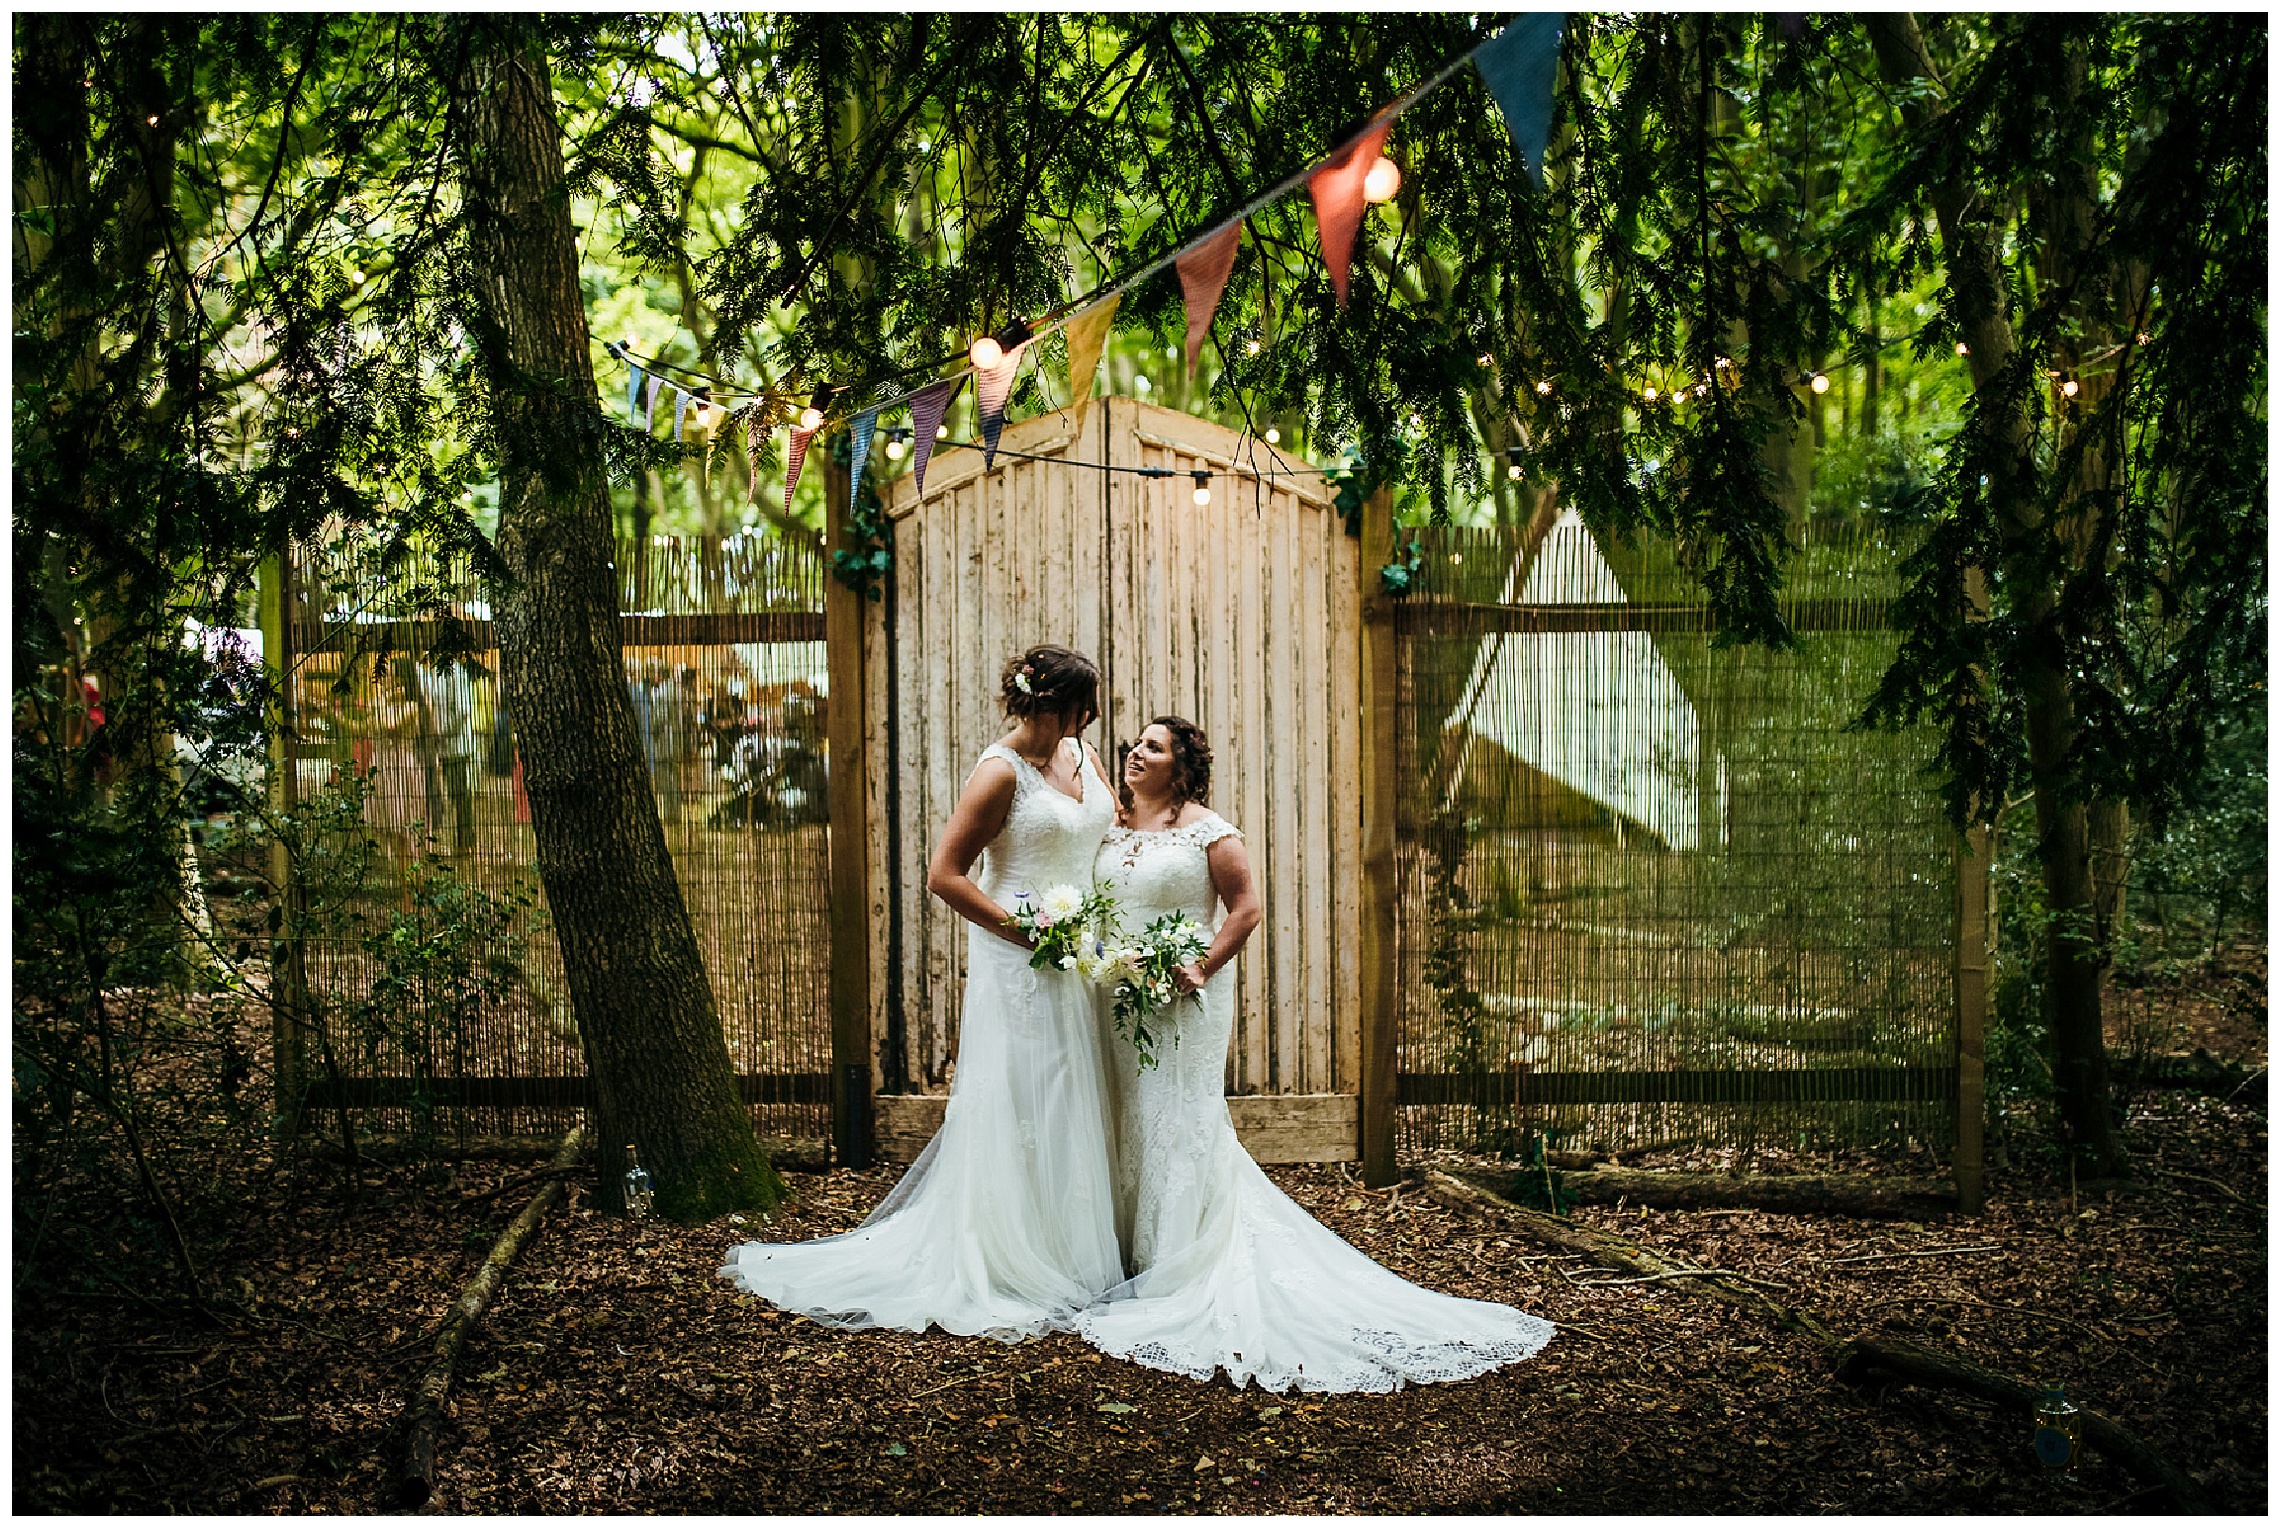 brides in white dresses stand together under bunting at woodland wedding venue